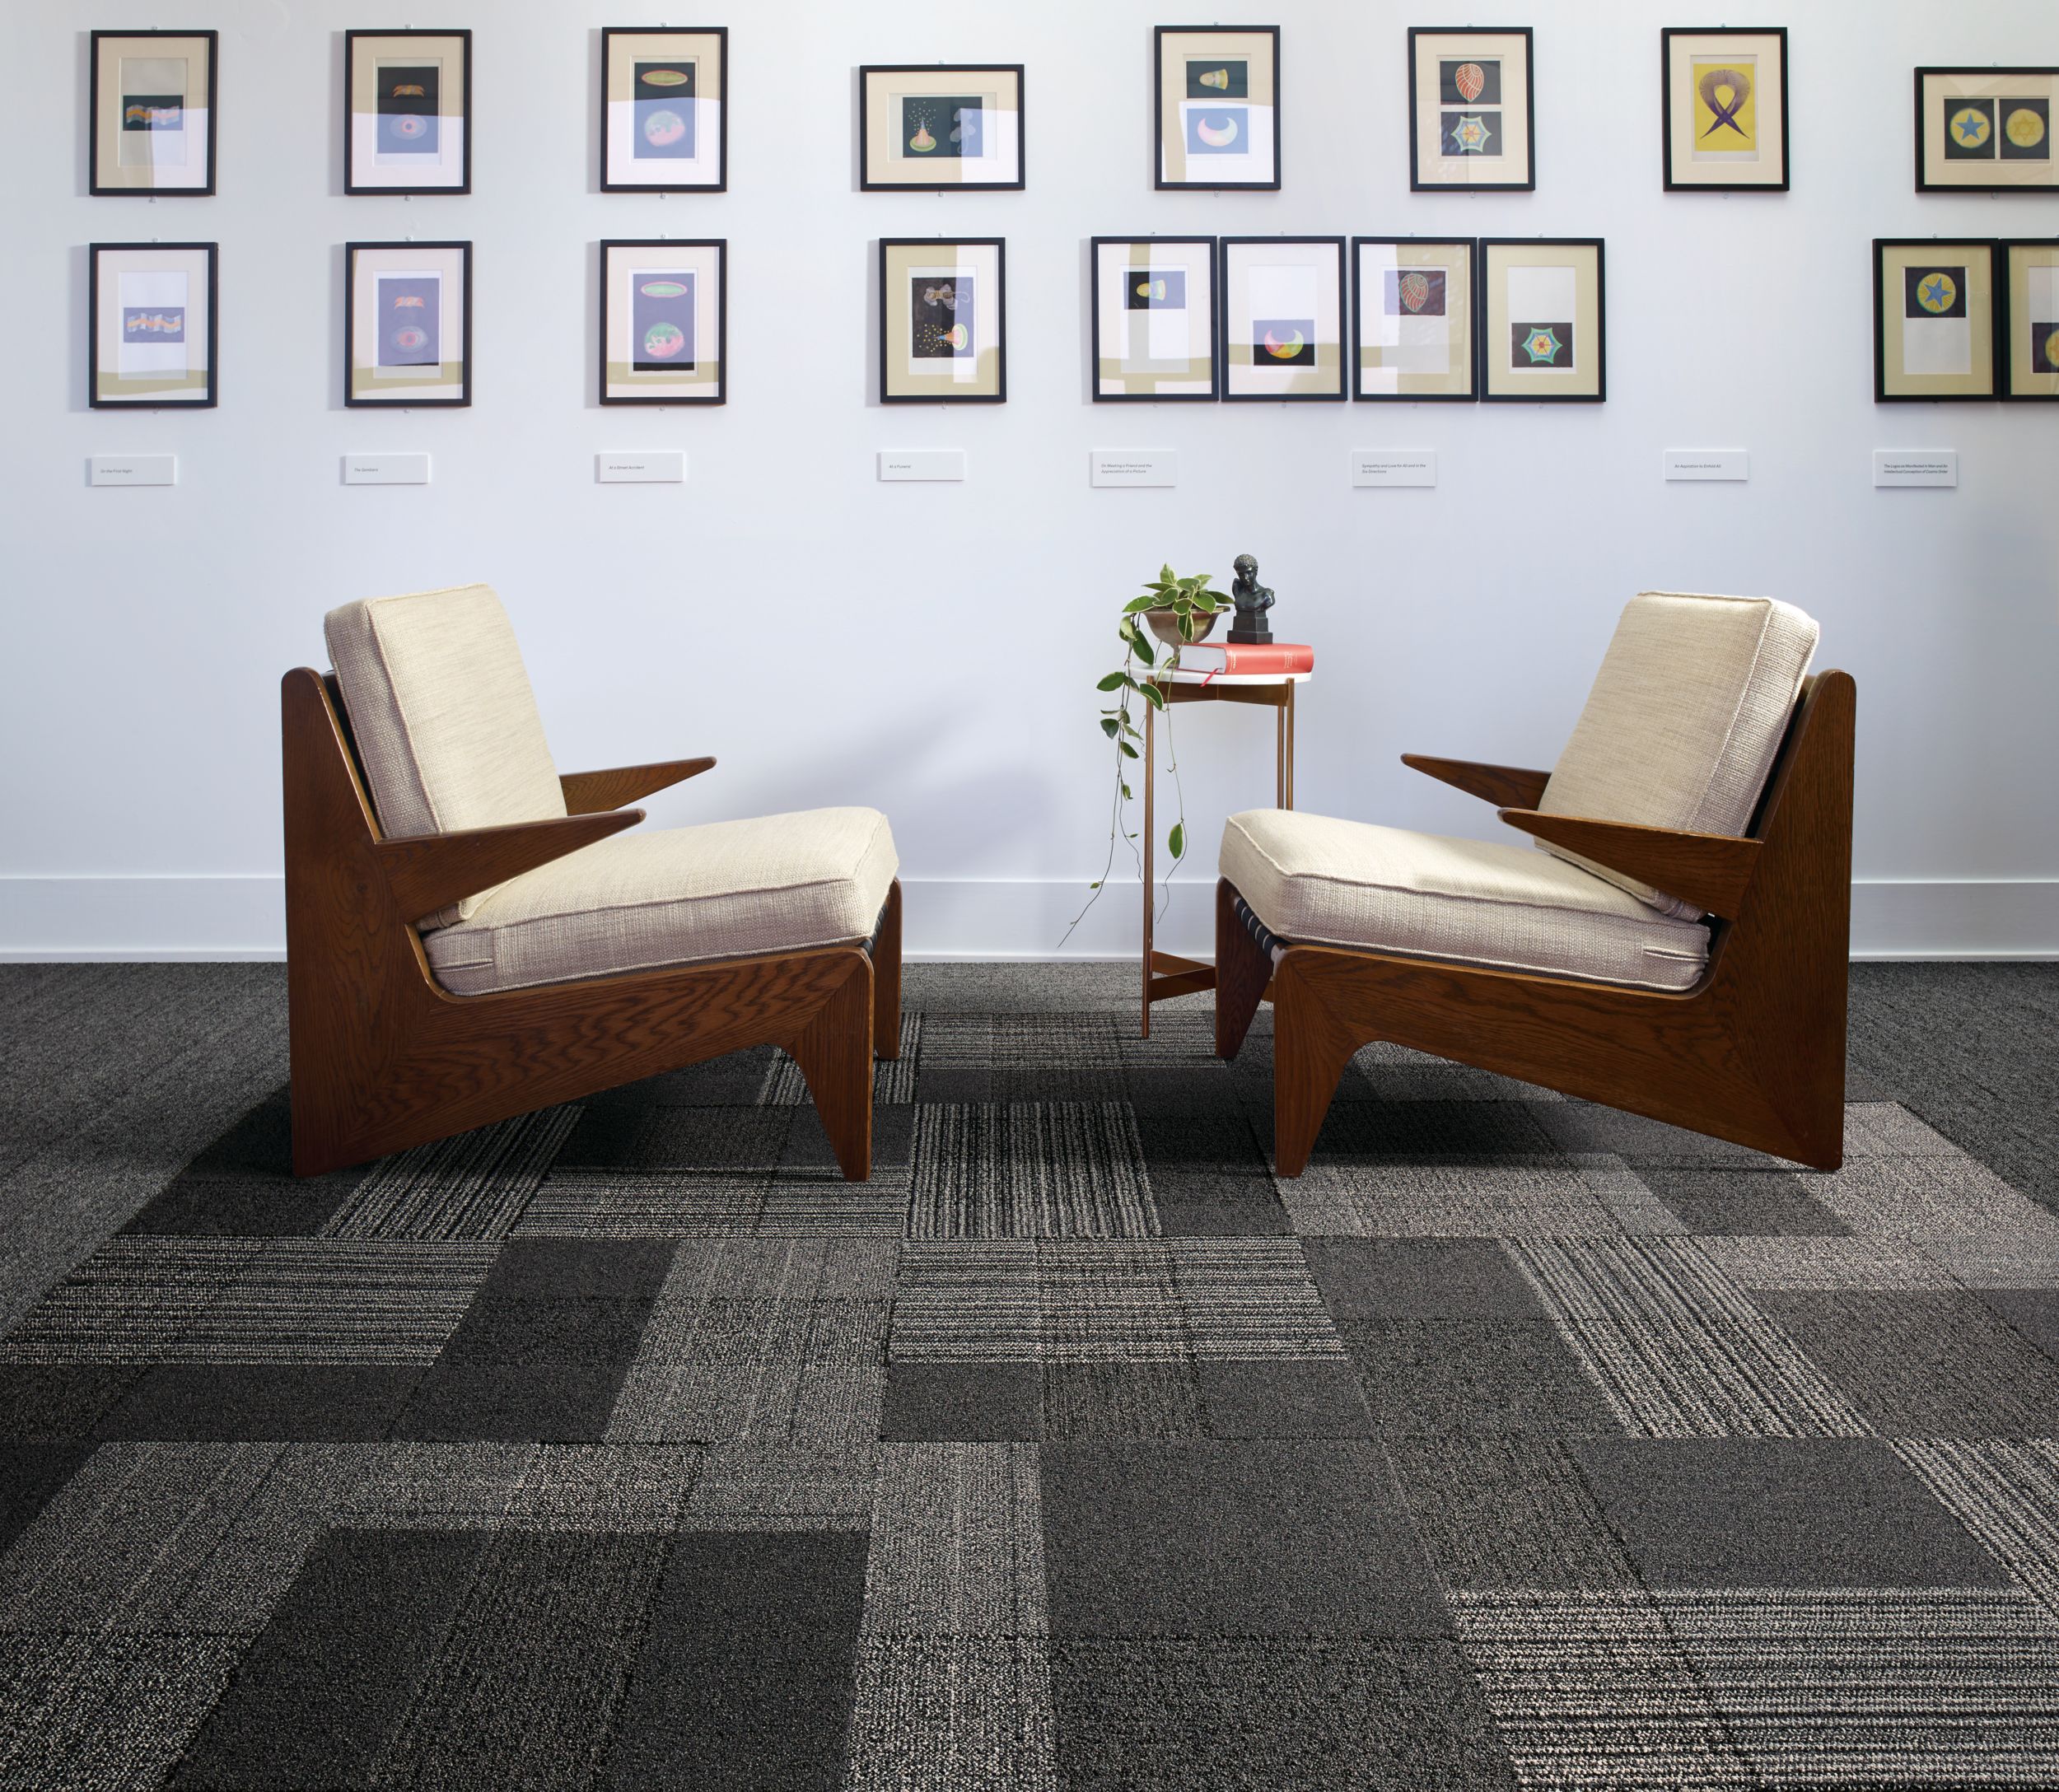 Interface ShadowBox Velour carpet tile and WW860 plank carpet tile in seating area with two chairs and a lot of small prints on the wall Bildnummer 2